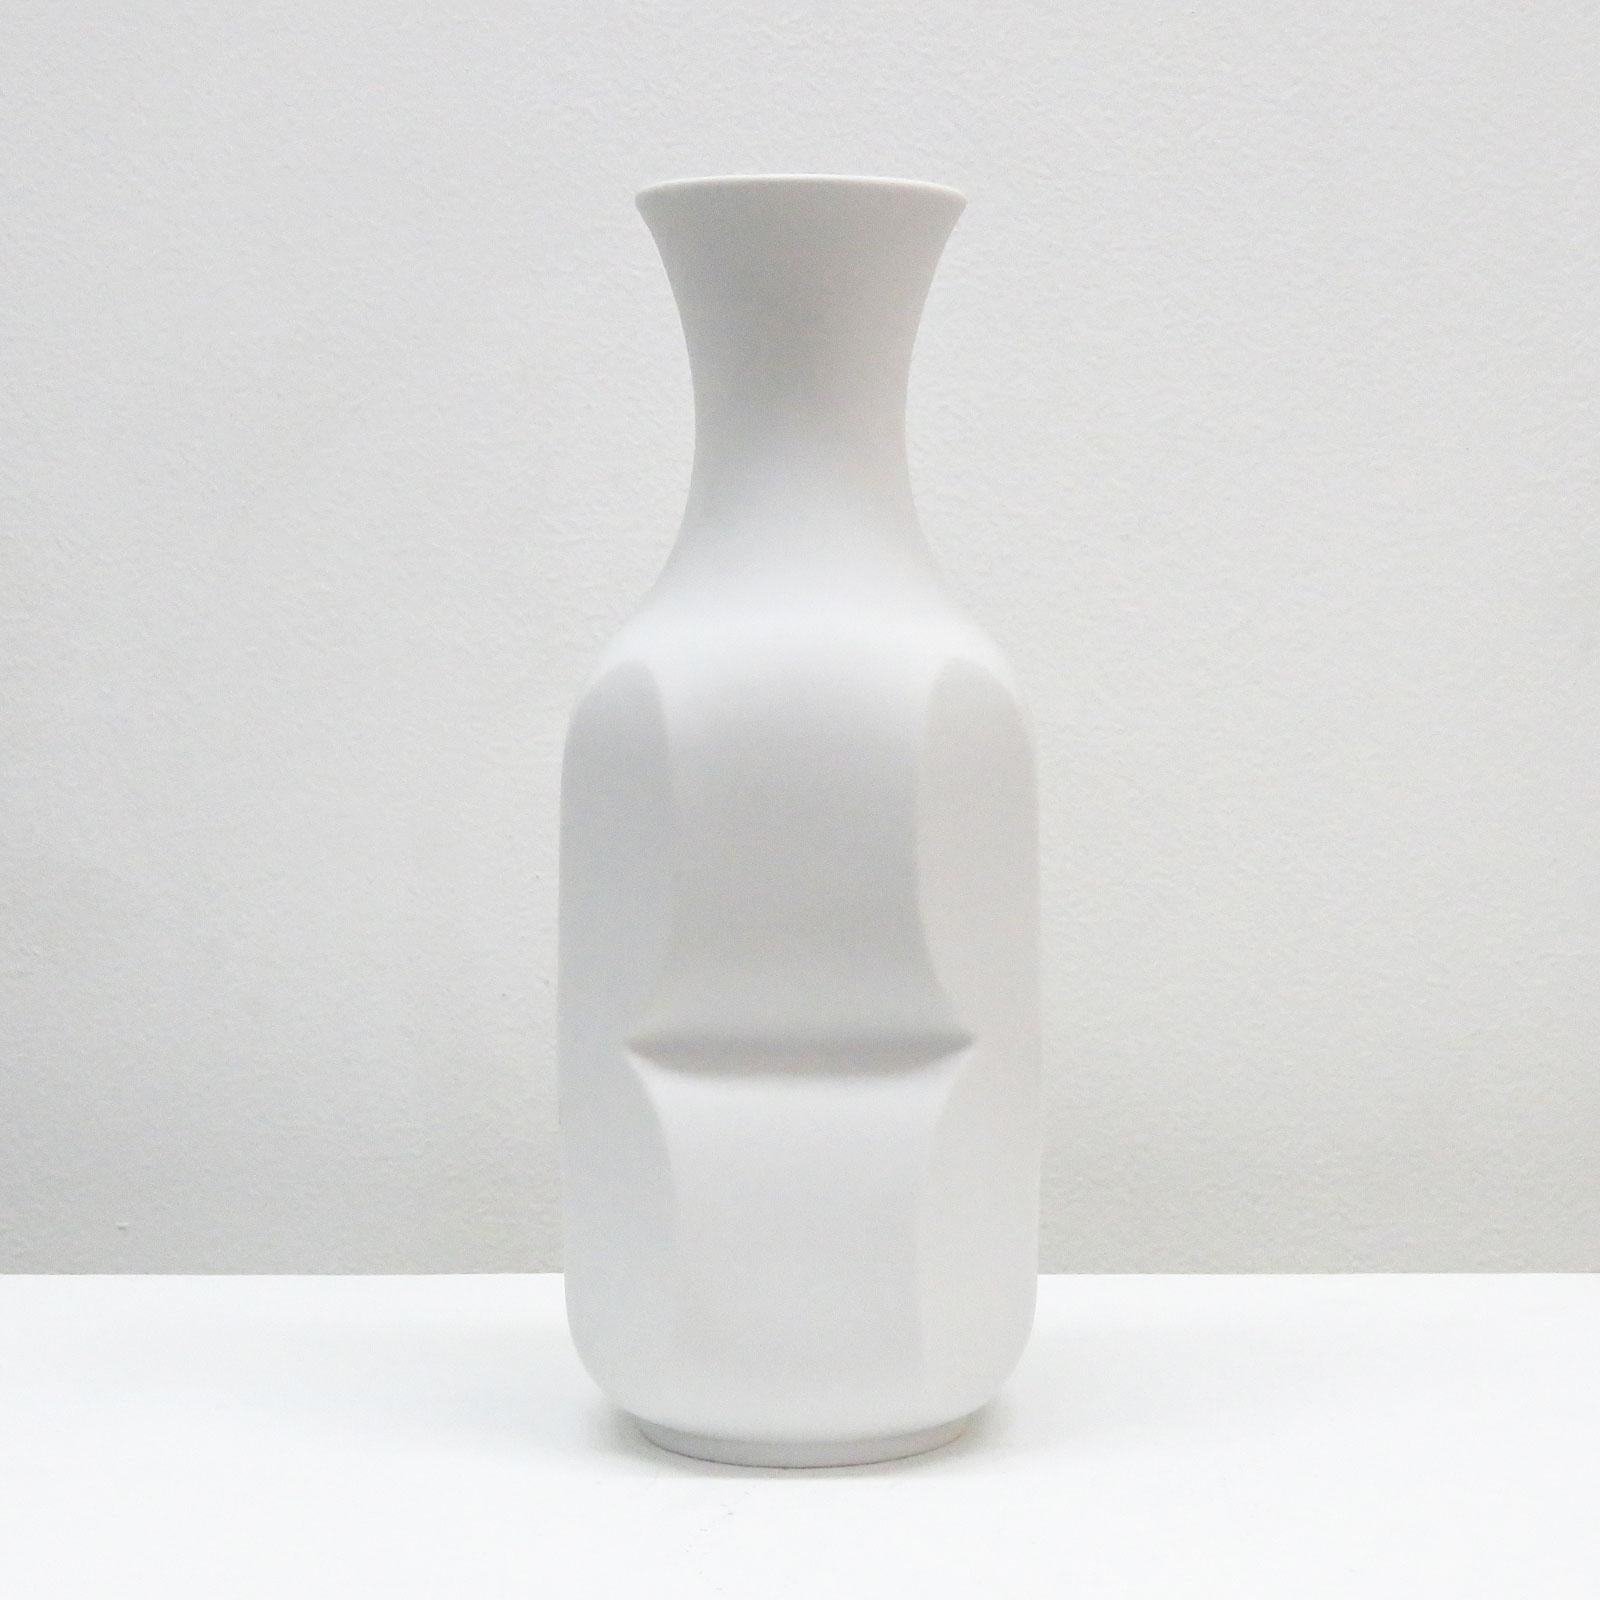 Sculptural porcelain vase by Heinrich Fuchs for Hutschenreuther, bisque exterior and glazed interior, released between 1968 and 1970, marked.